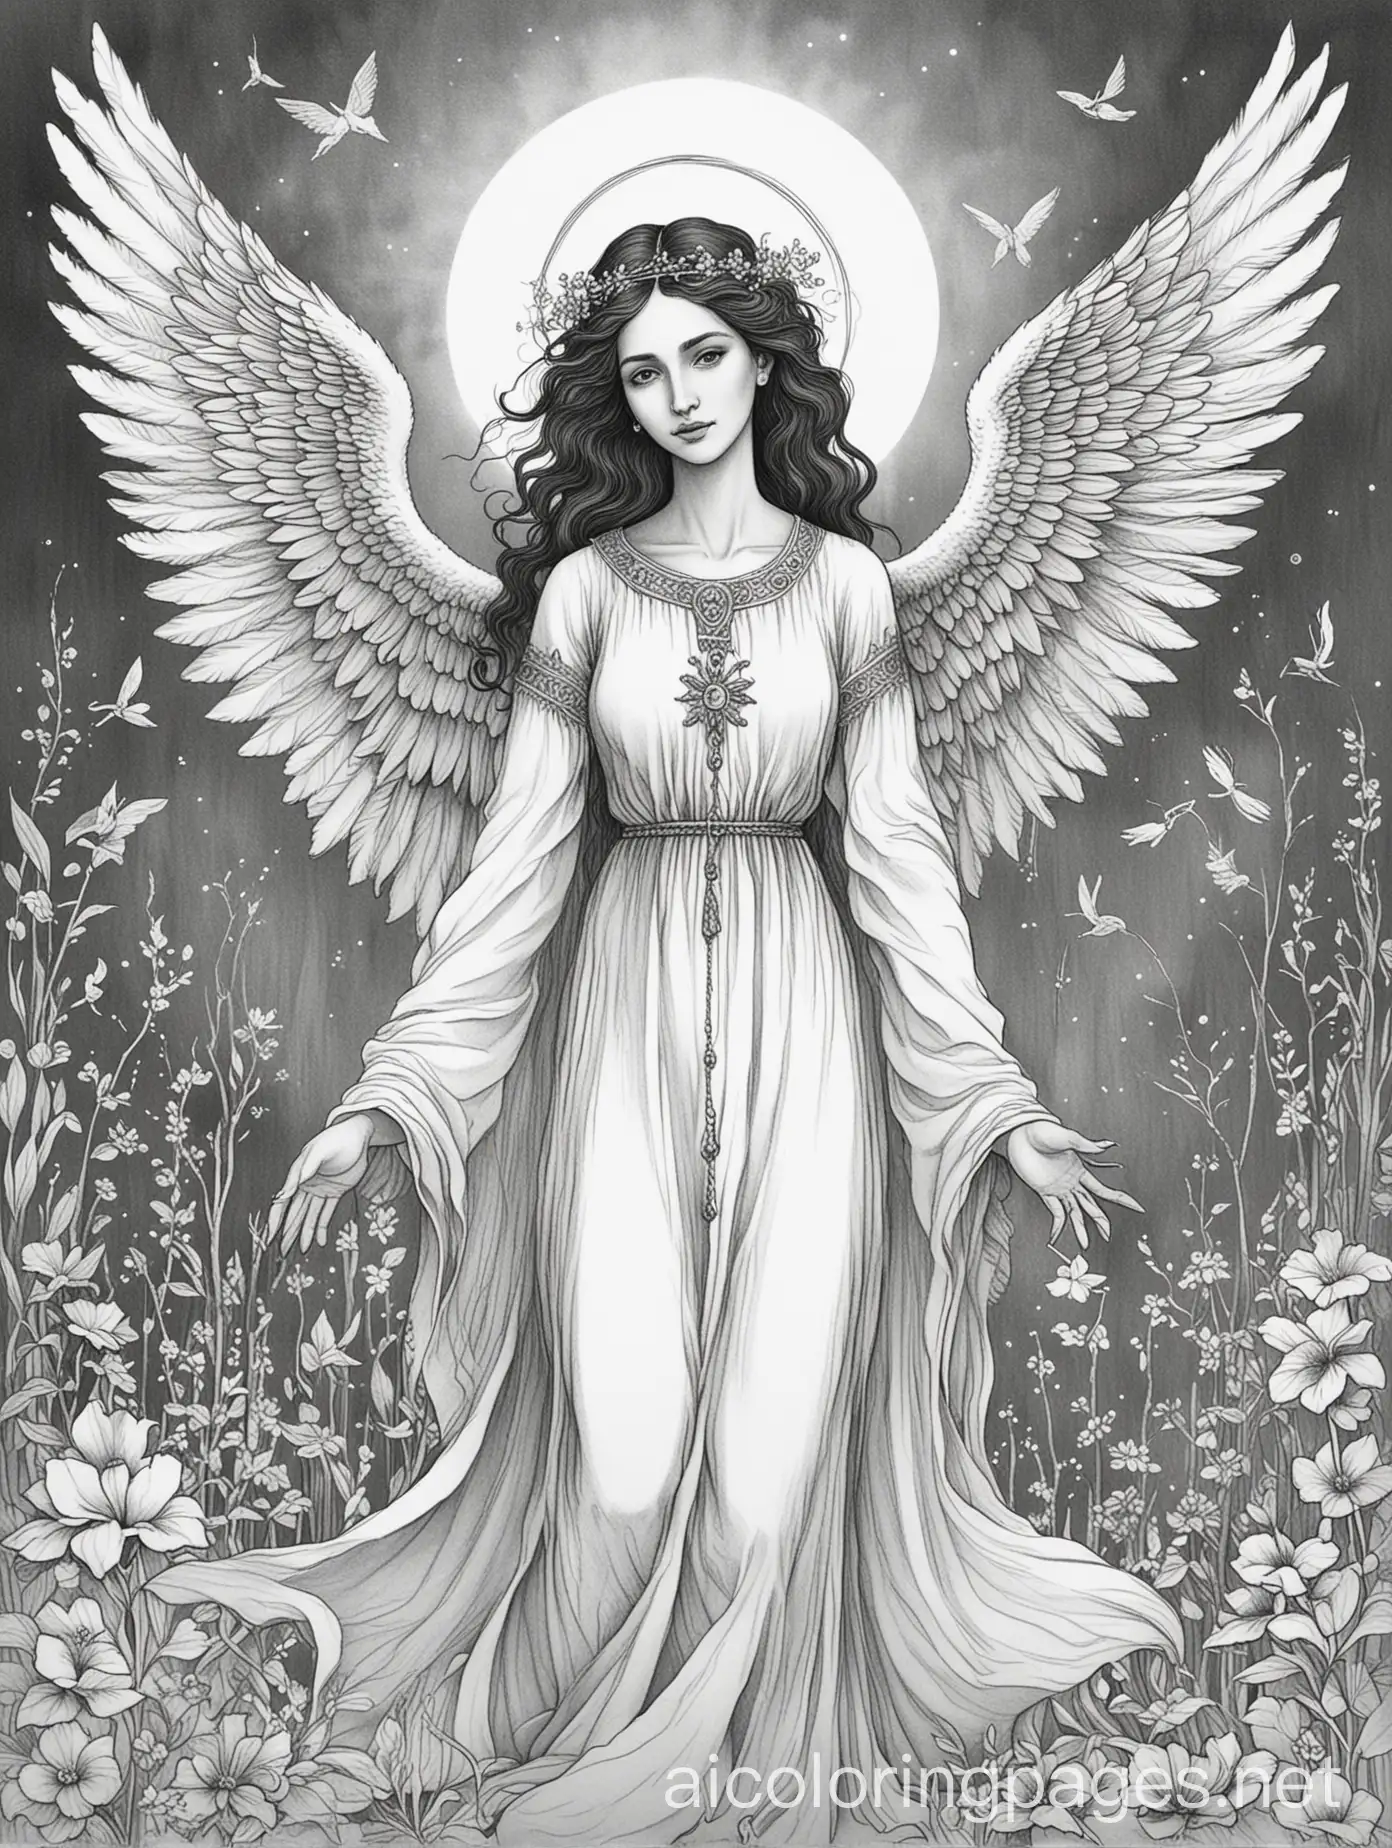 biblical angel adult colouring book in the style of leonora carrington, Coloring Page, black and white, line art, white background, Simplicity, Ample White Space. The background of the coloring page is plain white to make it easy for young children to color within the lines. The outlines of all the subjects are easy to distinguish, making it simple for kids to color without too much difficulty